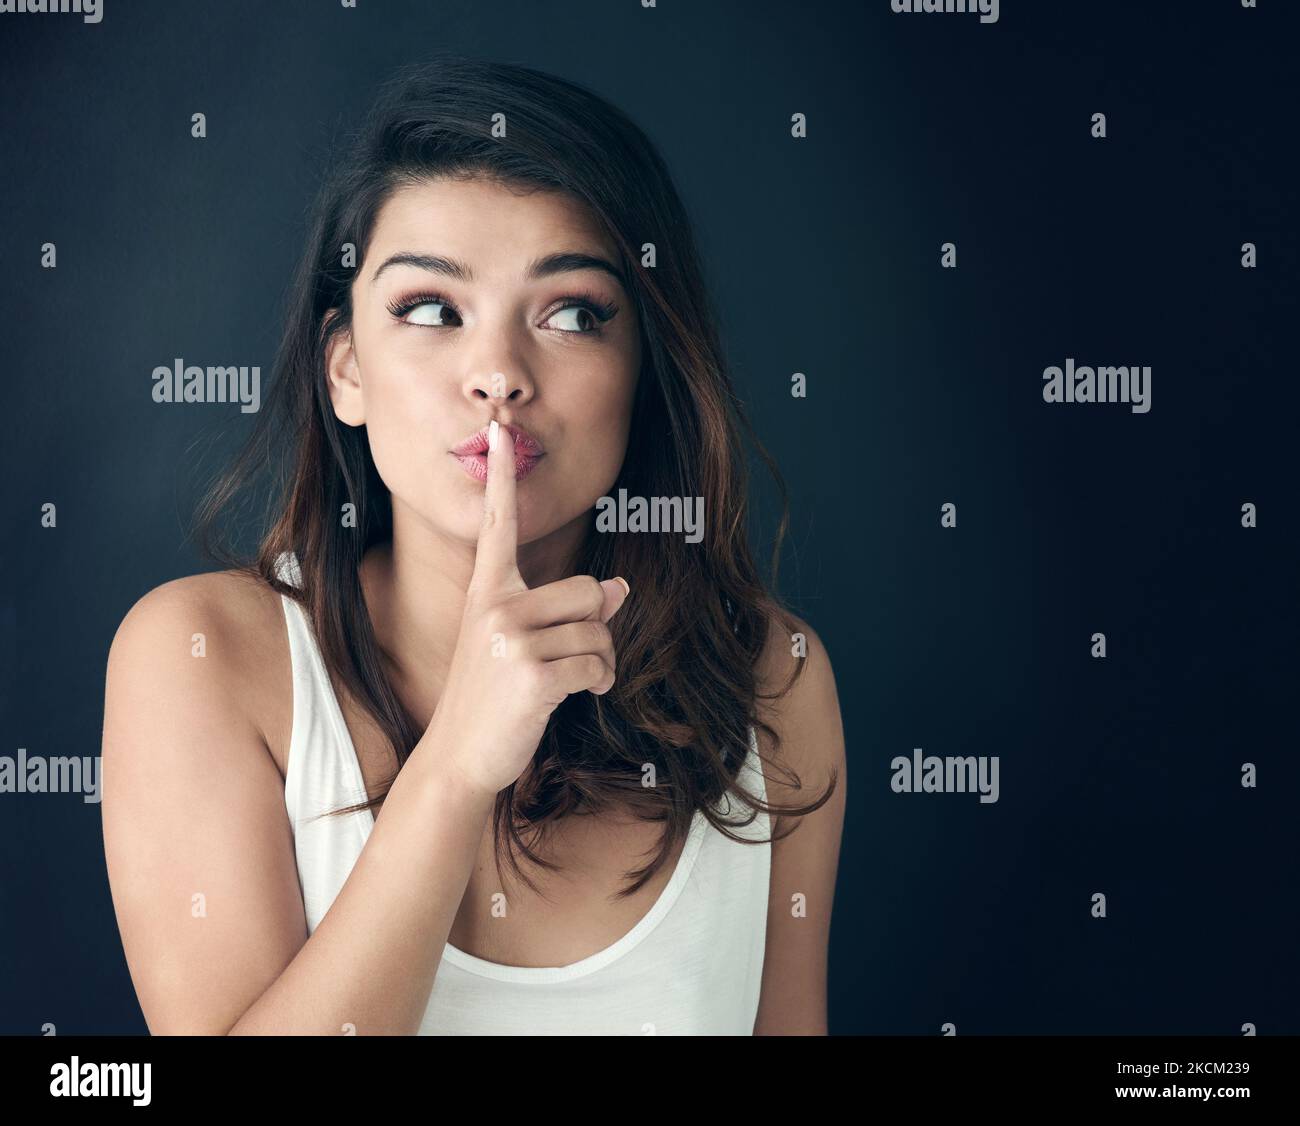 Im not saying a word. Studio shot of a beautiful young woman posing with her finger on her lips. Stock Photo